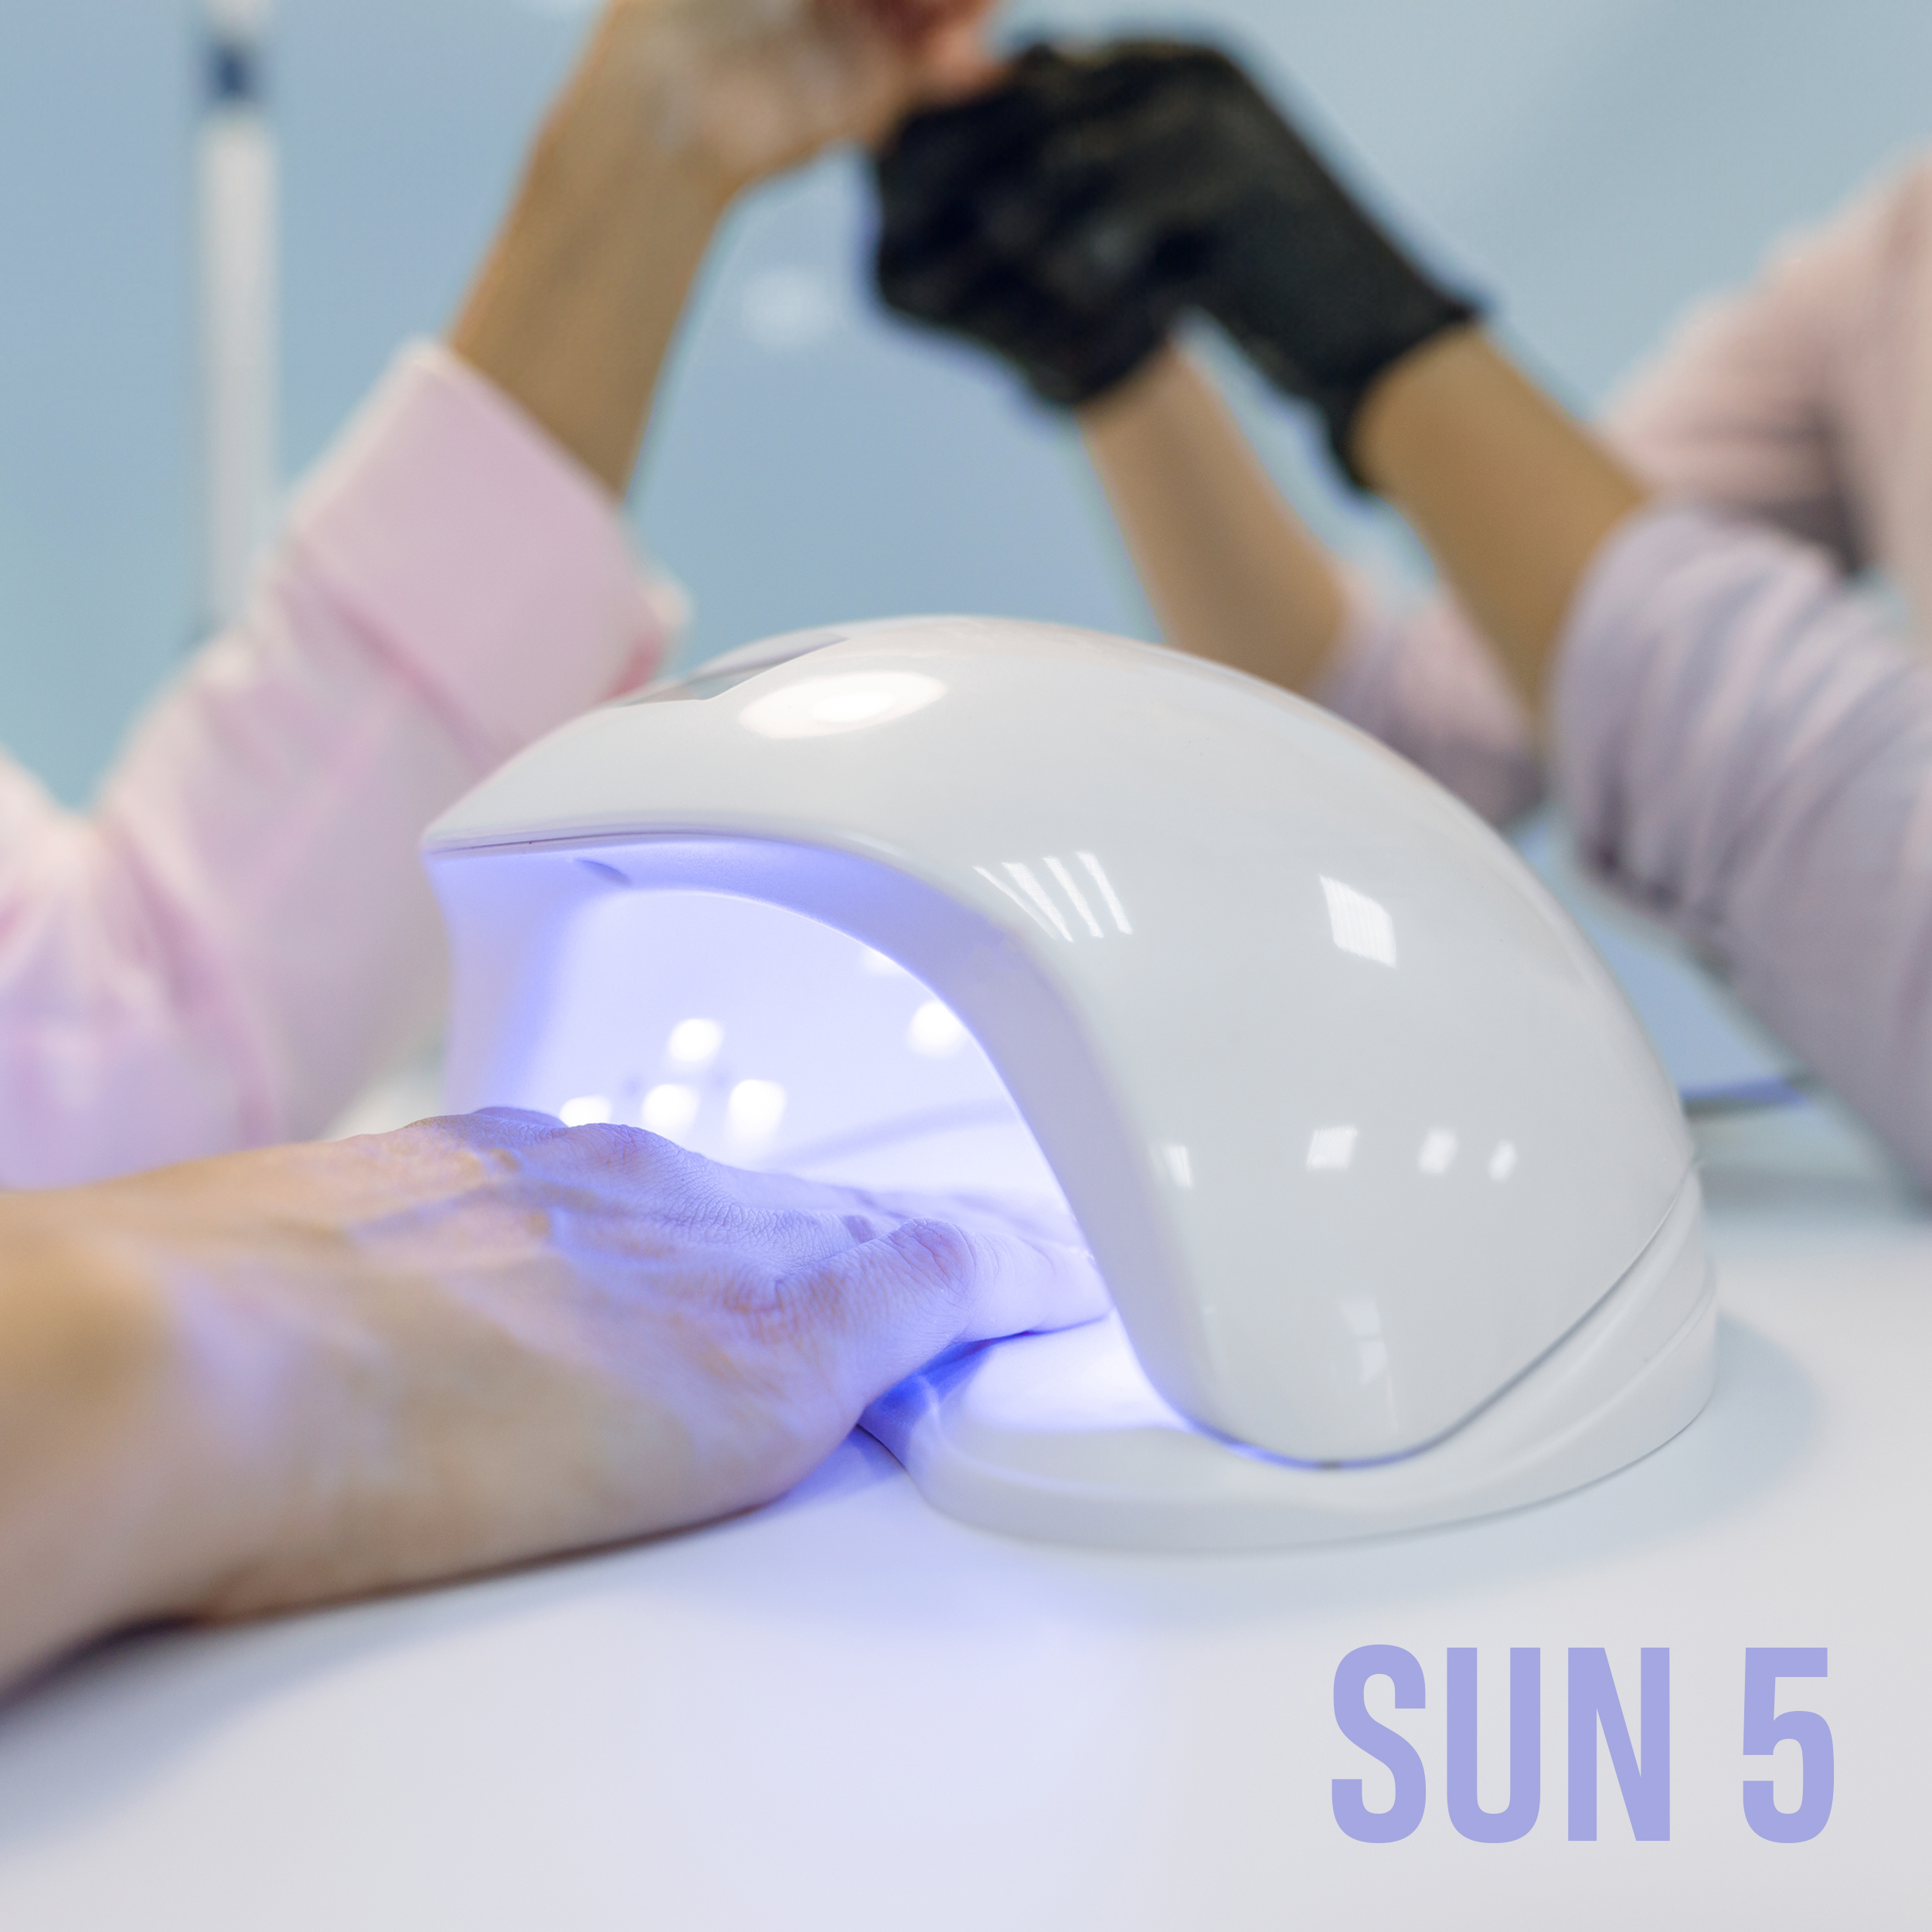 LED/UV SUN 5 manicure lamp: top quality of the latest generation